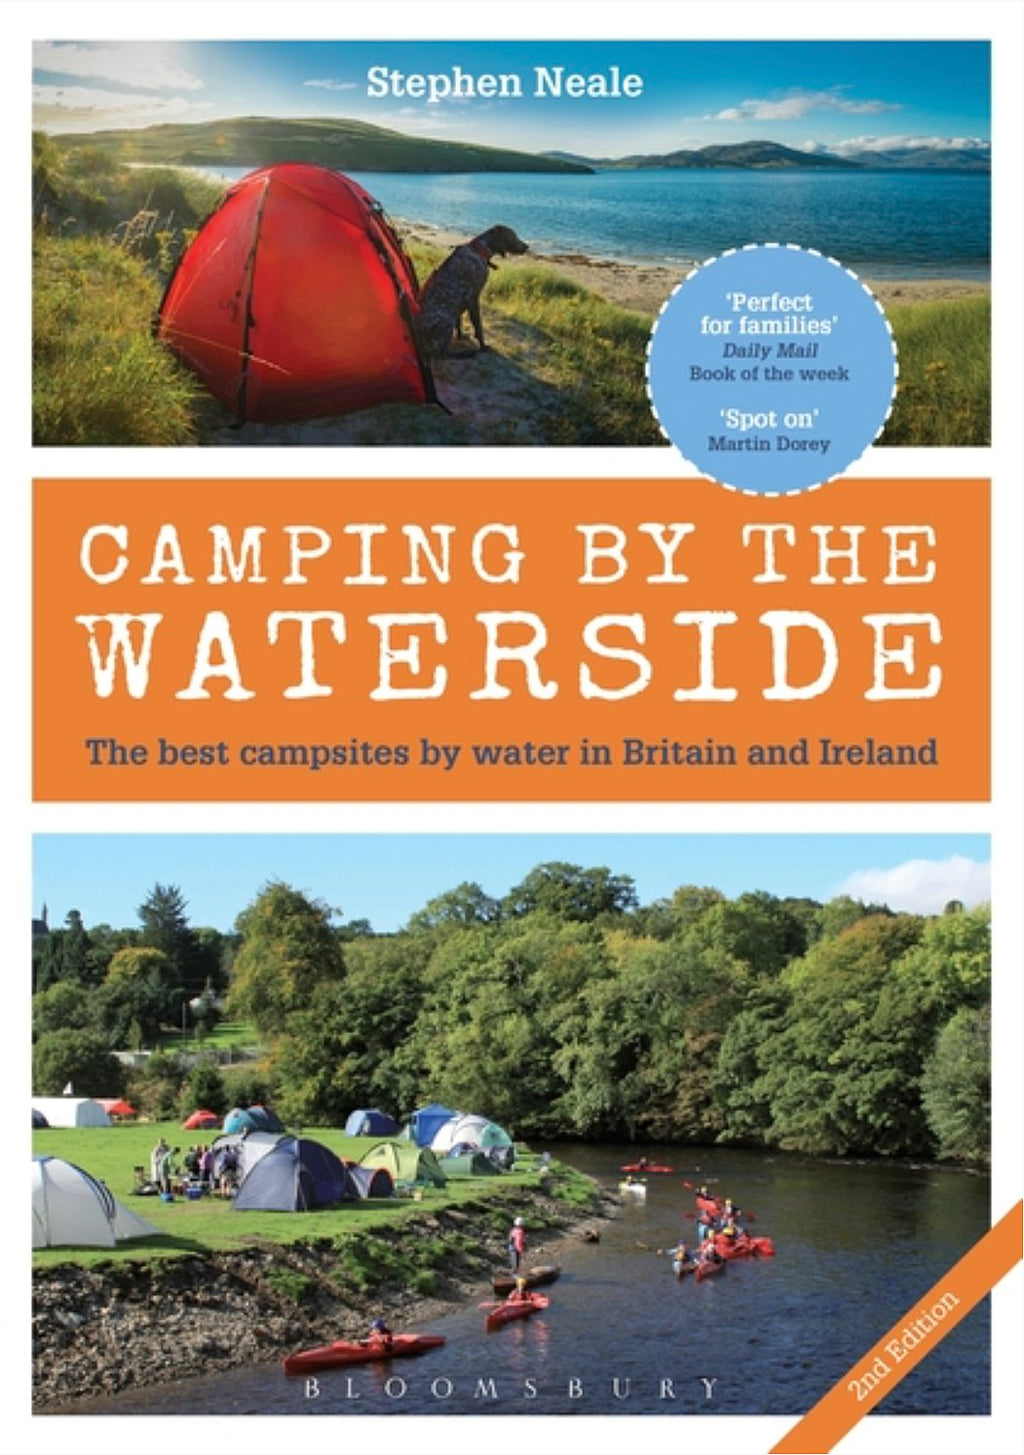 Camping by the Waterside paperback - STEPHEN-NEALE.COM